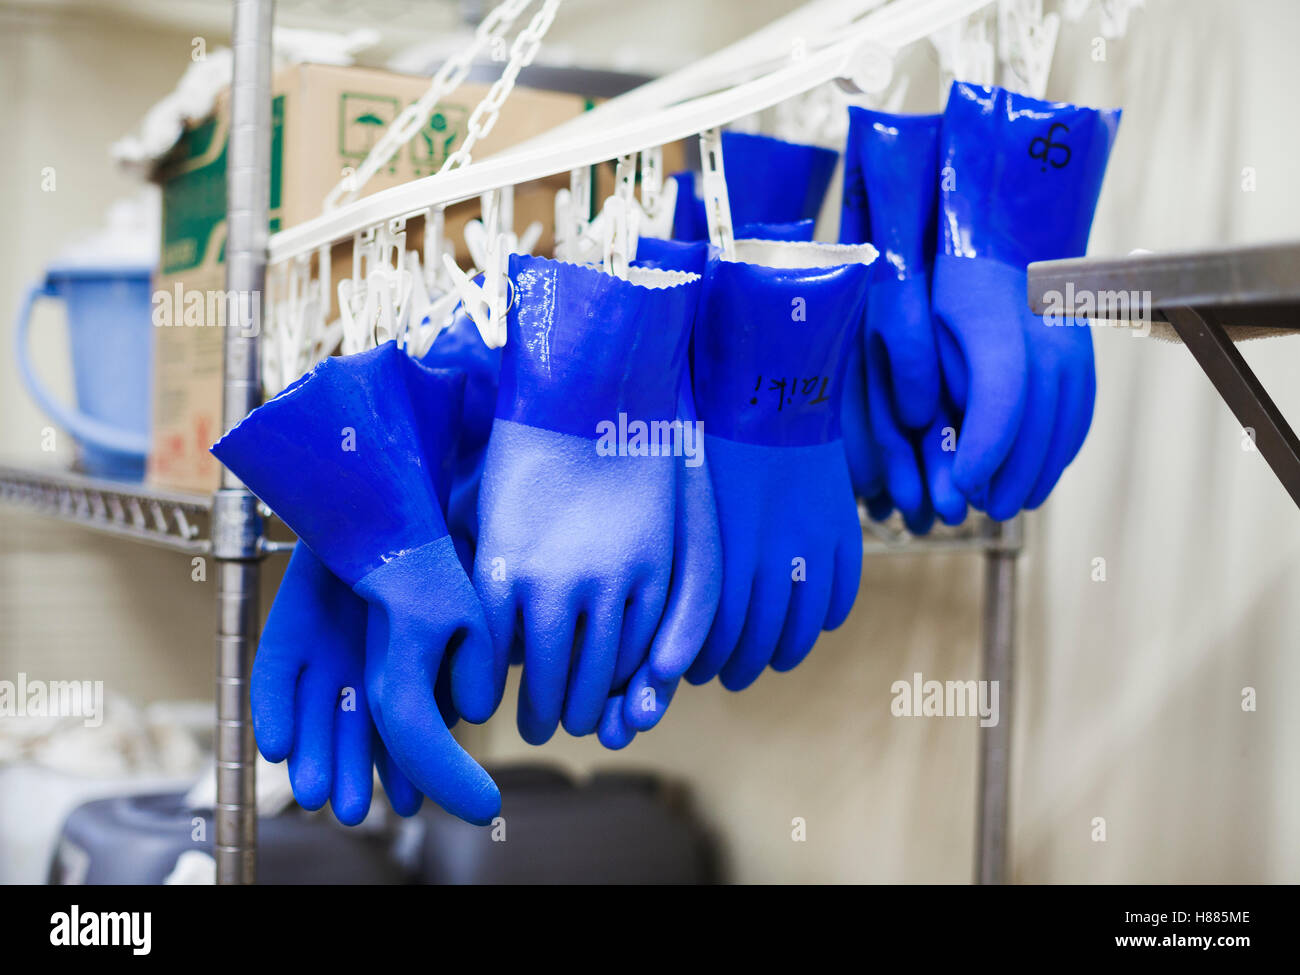 Row of blue plastic gloves hanging on hooks in a brewery. Stock Photo